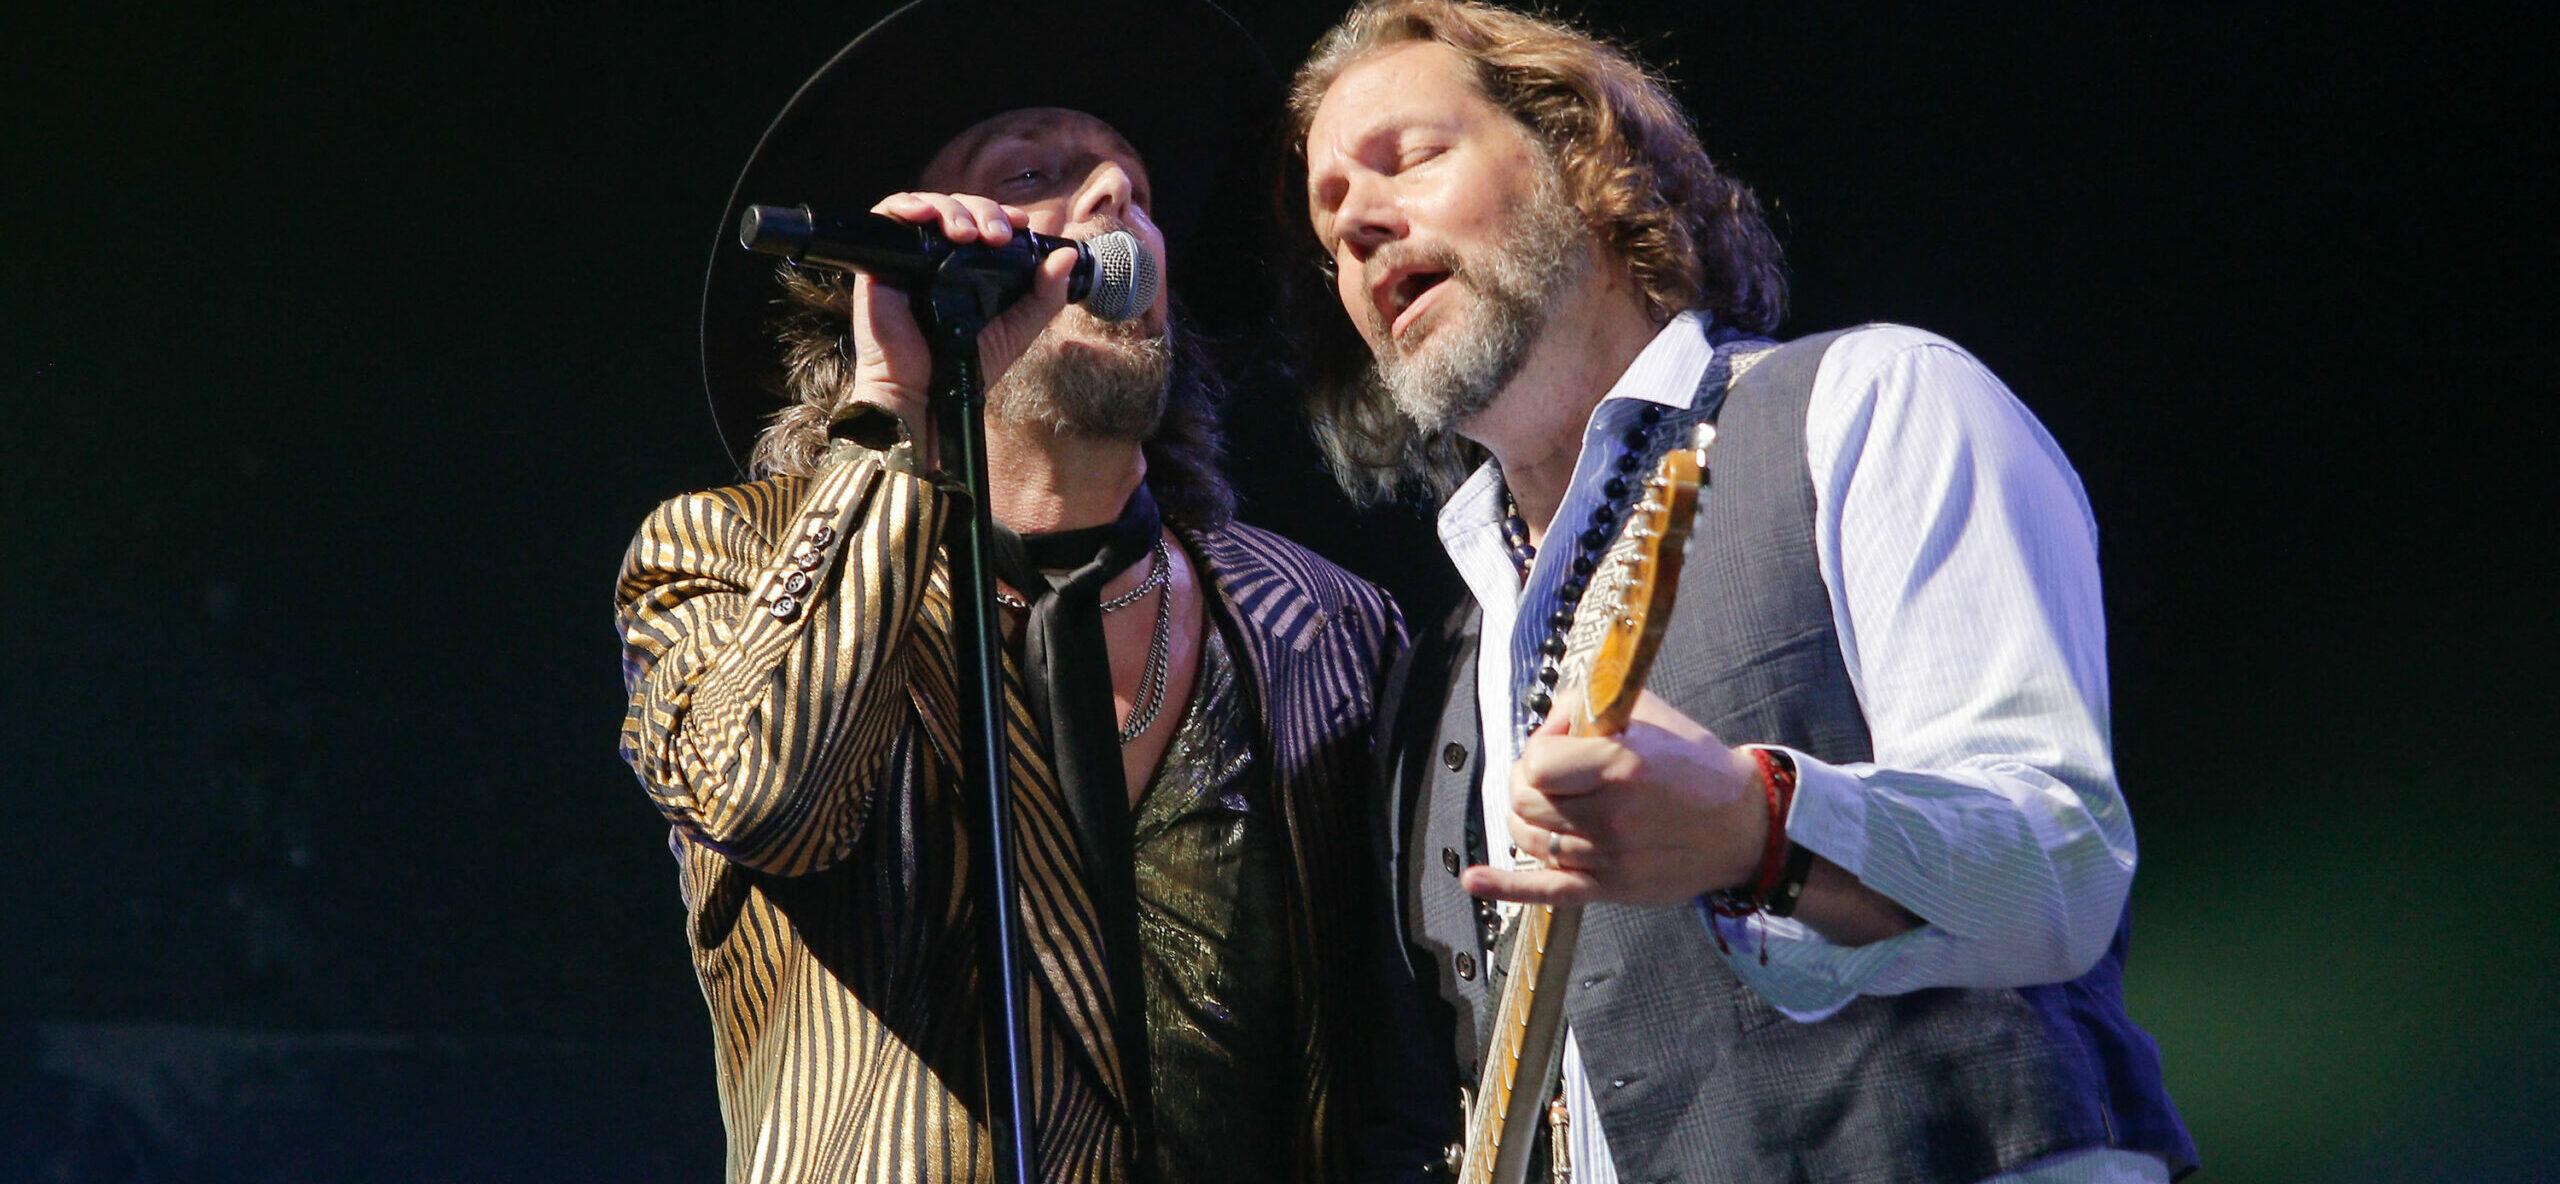 'Black Crowes' Settle Lawsuit With Former Drummer Over Music Royalties